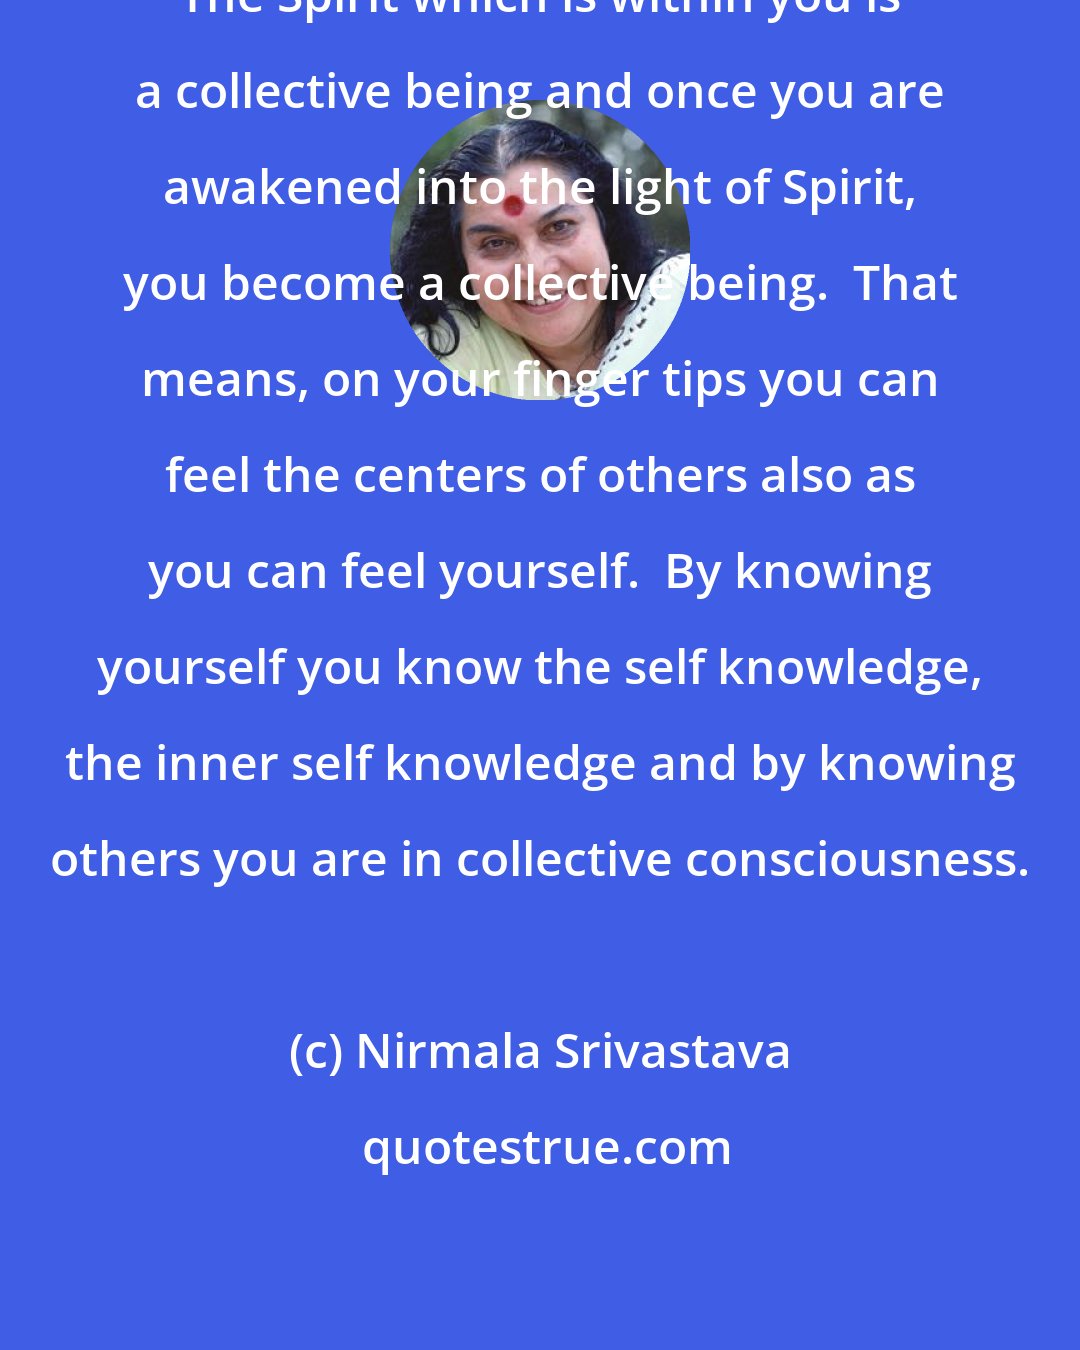 Nirmala Srivastava: The Spirit which is within you is a collective being and once you are awakened into the light of Spirit, you become a collective being.  That means, on your finger tips you can feel the centers of others also as you can feel yourself.  By knowing yourself you know the self knowledge, the inner self knowledge and by knowing others you are in collective consciousness.